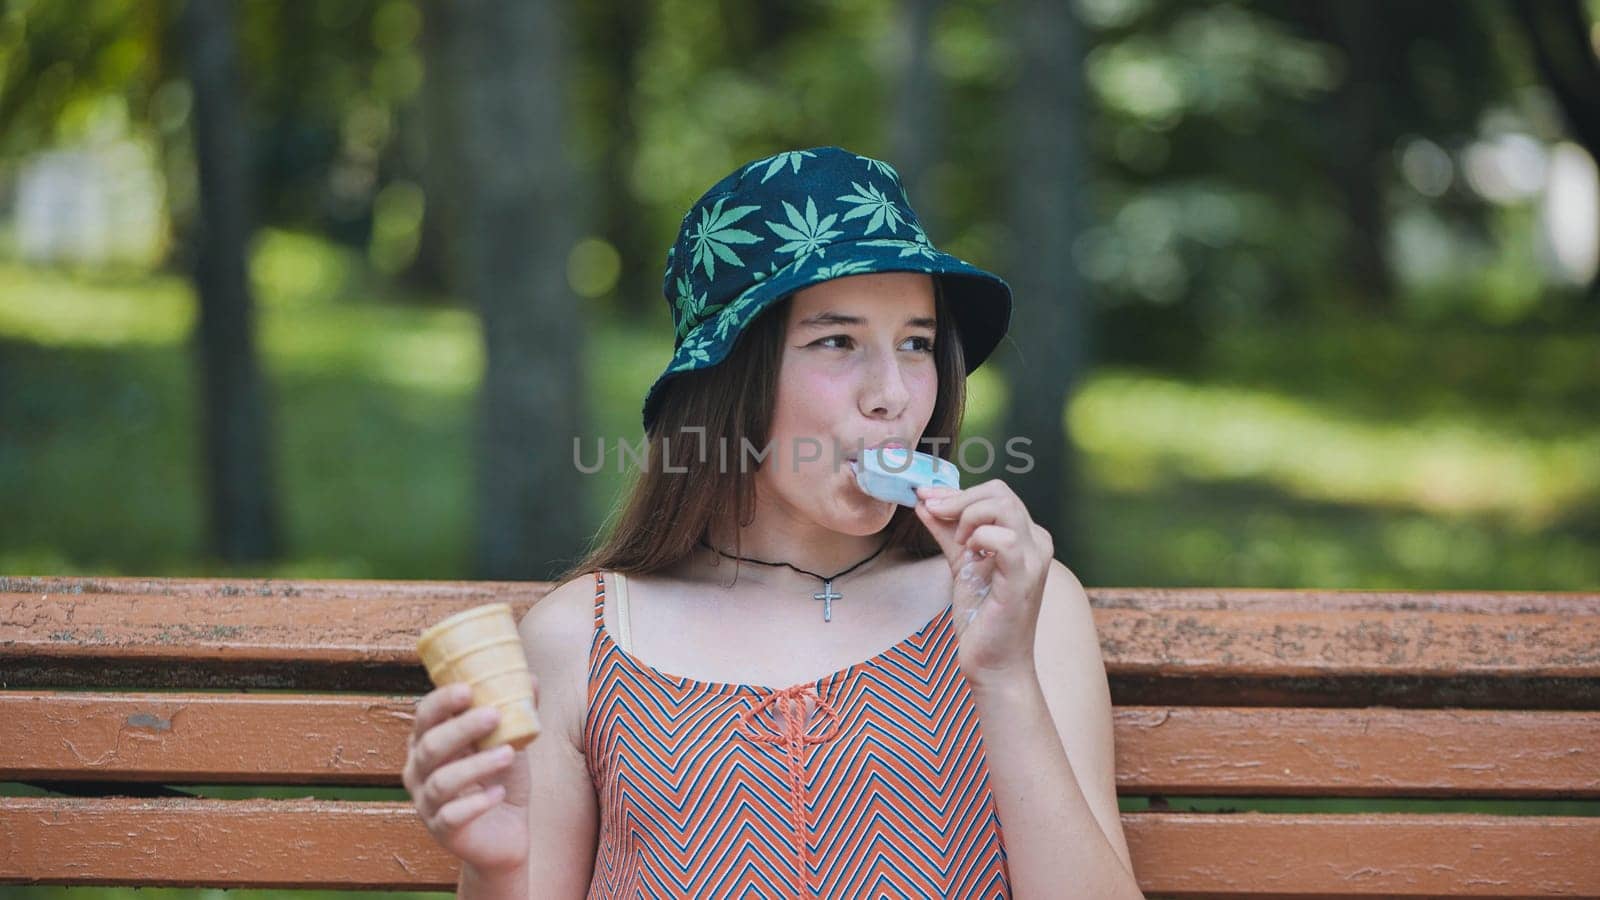 Teenage girl eating ice cream in the park on the bench